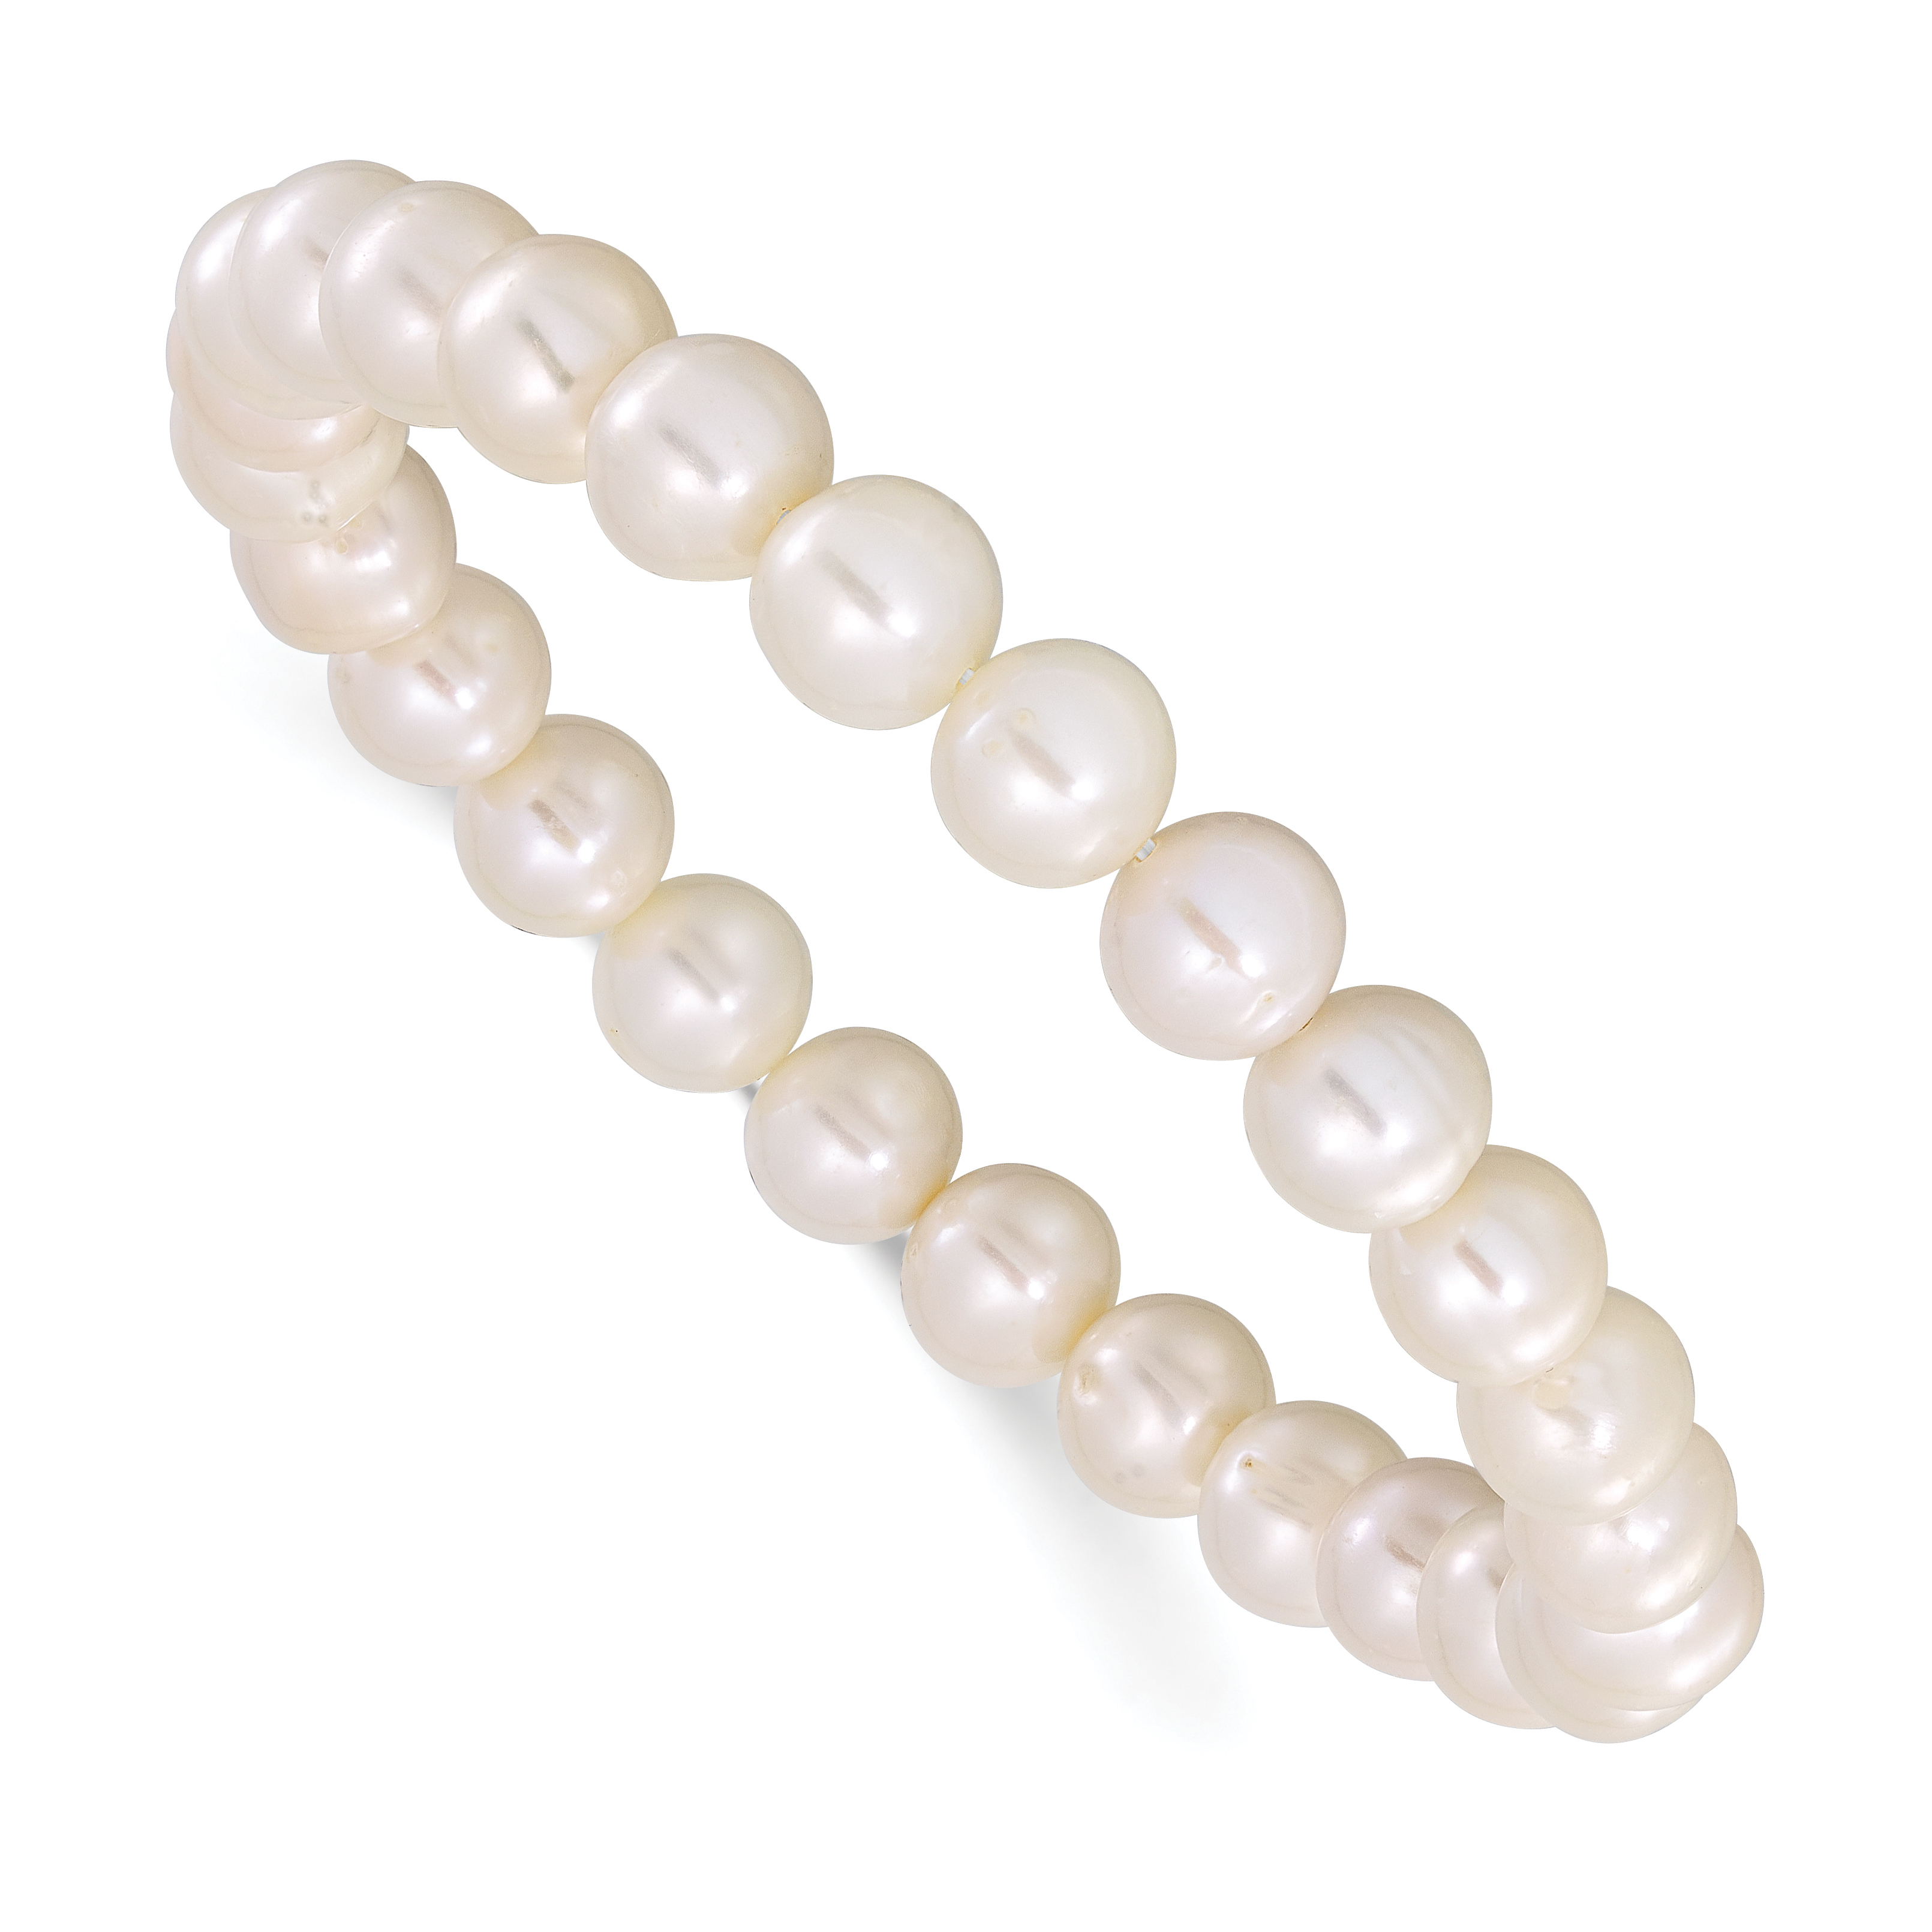 Natural White Freshwater Pearl Bracelet 8-8.5mm 7.5inches White Bracelet  Jewelry for Women and Girls - Walmart.com